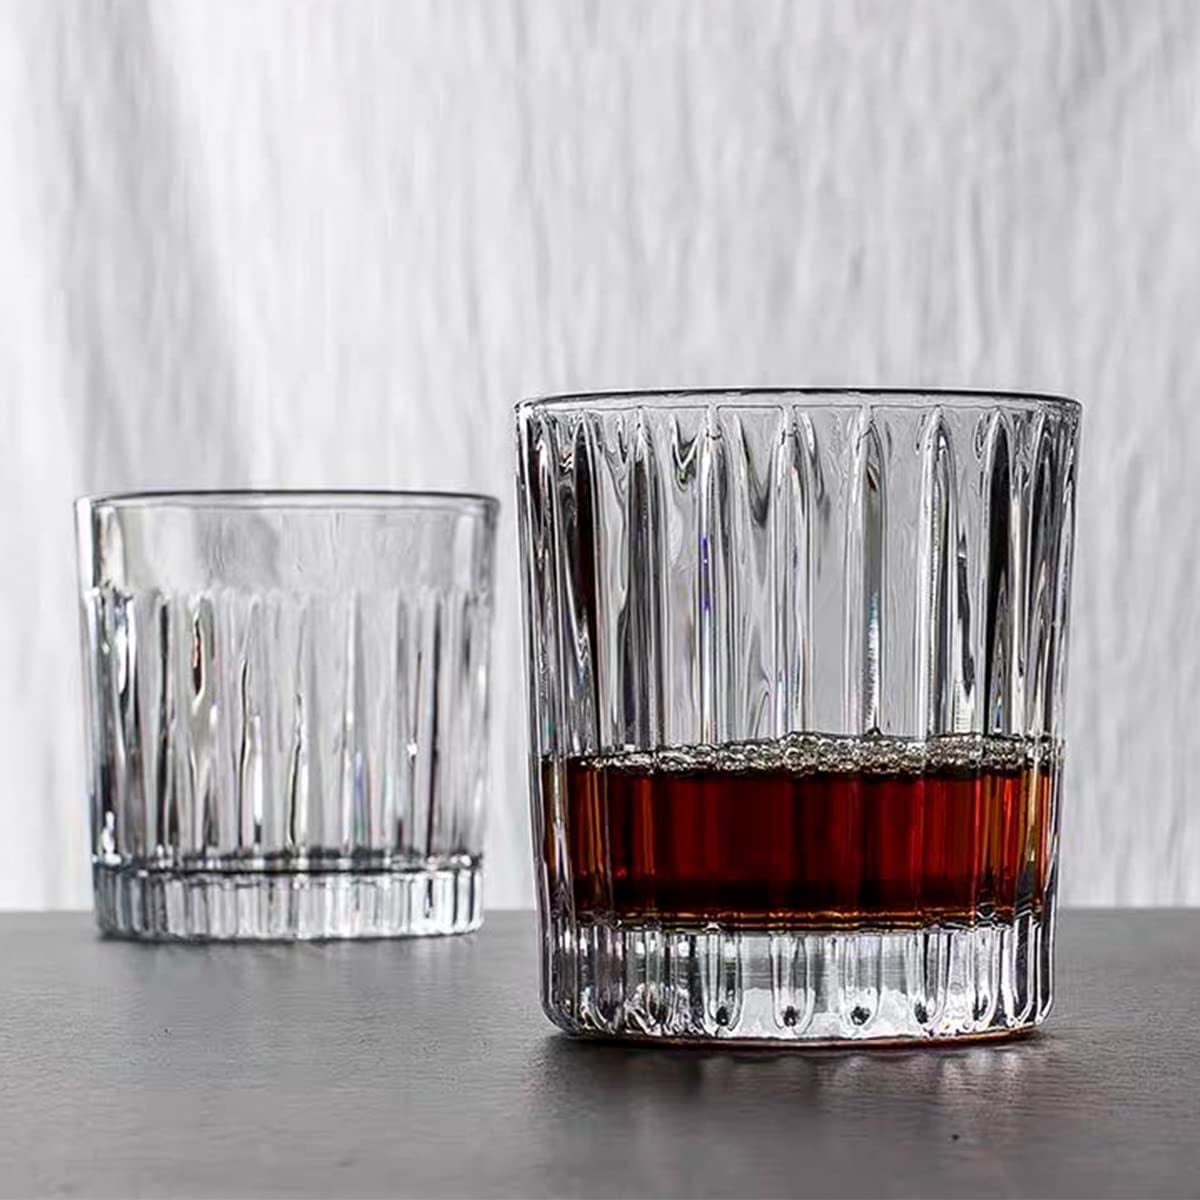 Whiskey Glasses Set of 2, 10.5 oz Old Fashioned Rocks Glass Whiskey  Tumblers Home Bar Drinks Bourbon…See more Whiskey Glasses Set of 2, 10.5 oz  Old